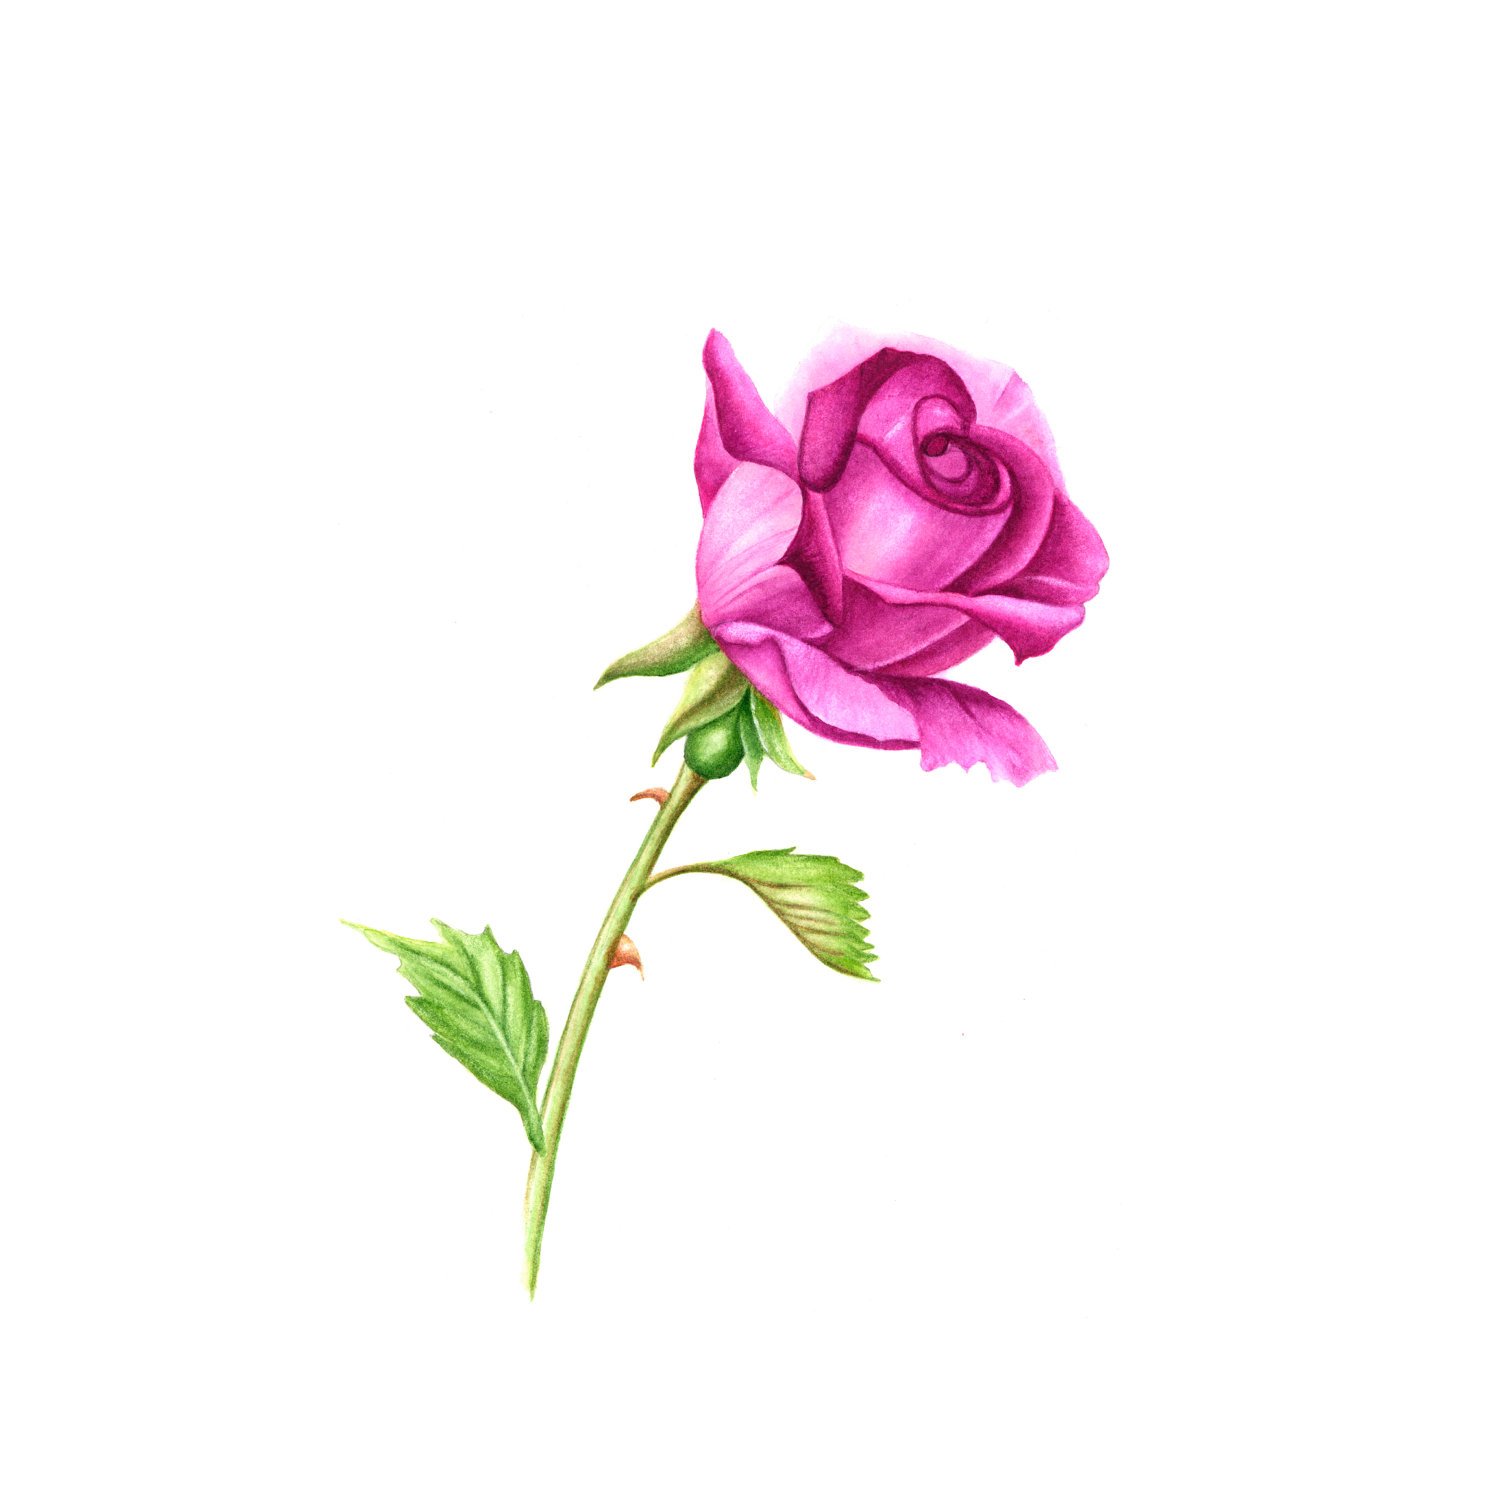 Rose With Stem Drawing Free download on ClipArtMag